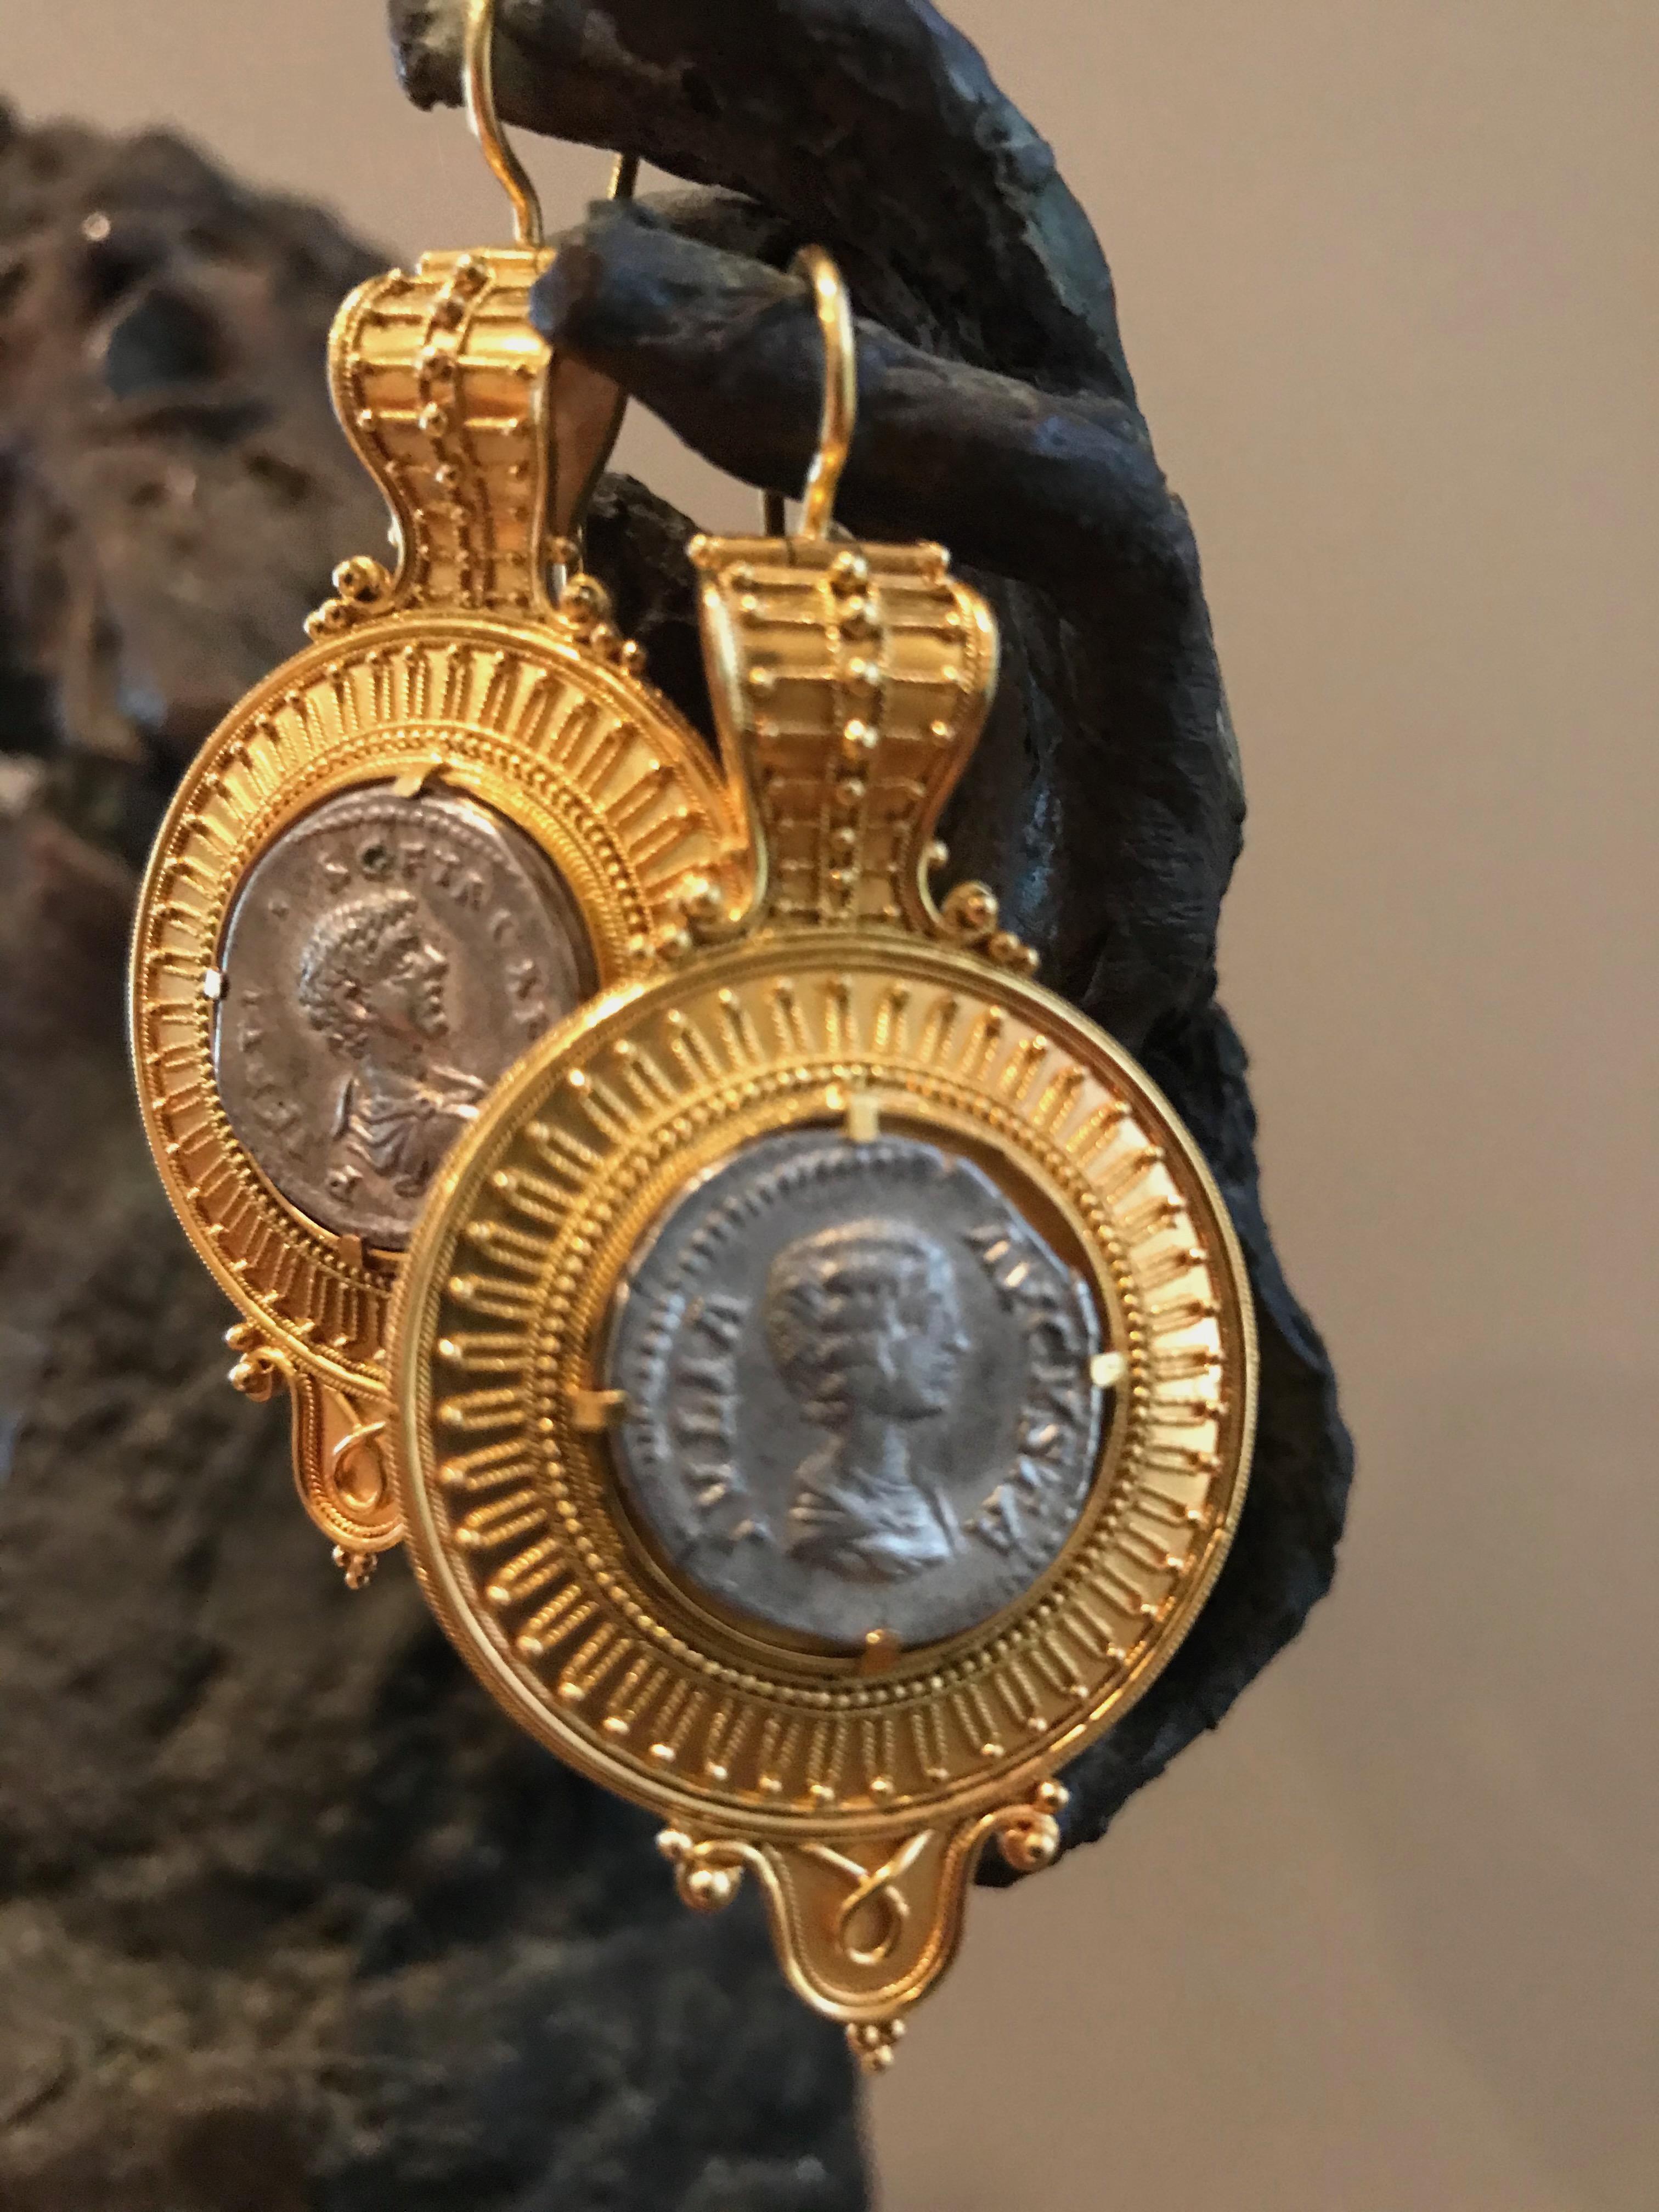 Castellani Ancient Silver Greek Coins circa 300BCE 15kt Gold Bulla Earrings  For Sale 2